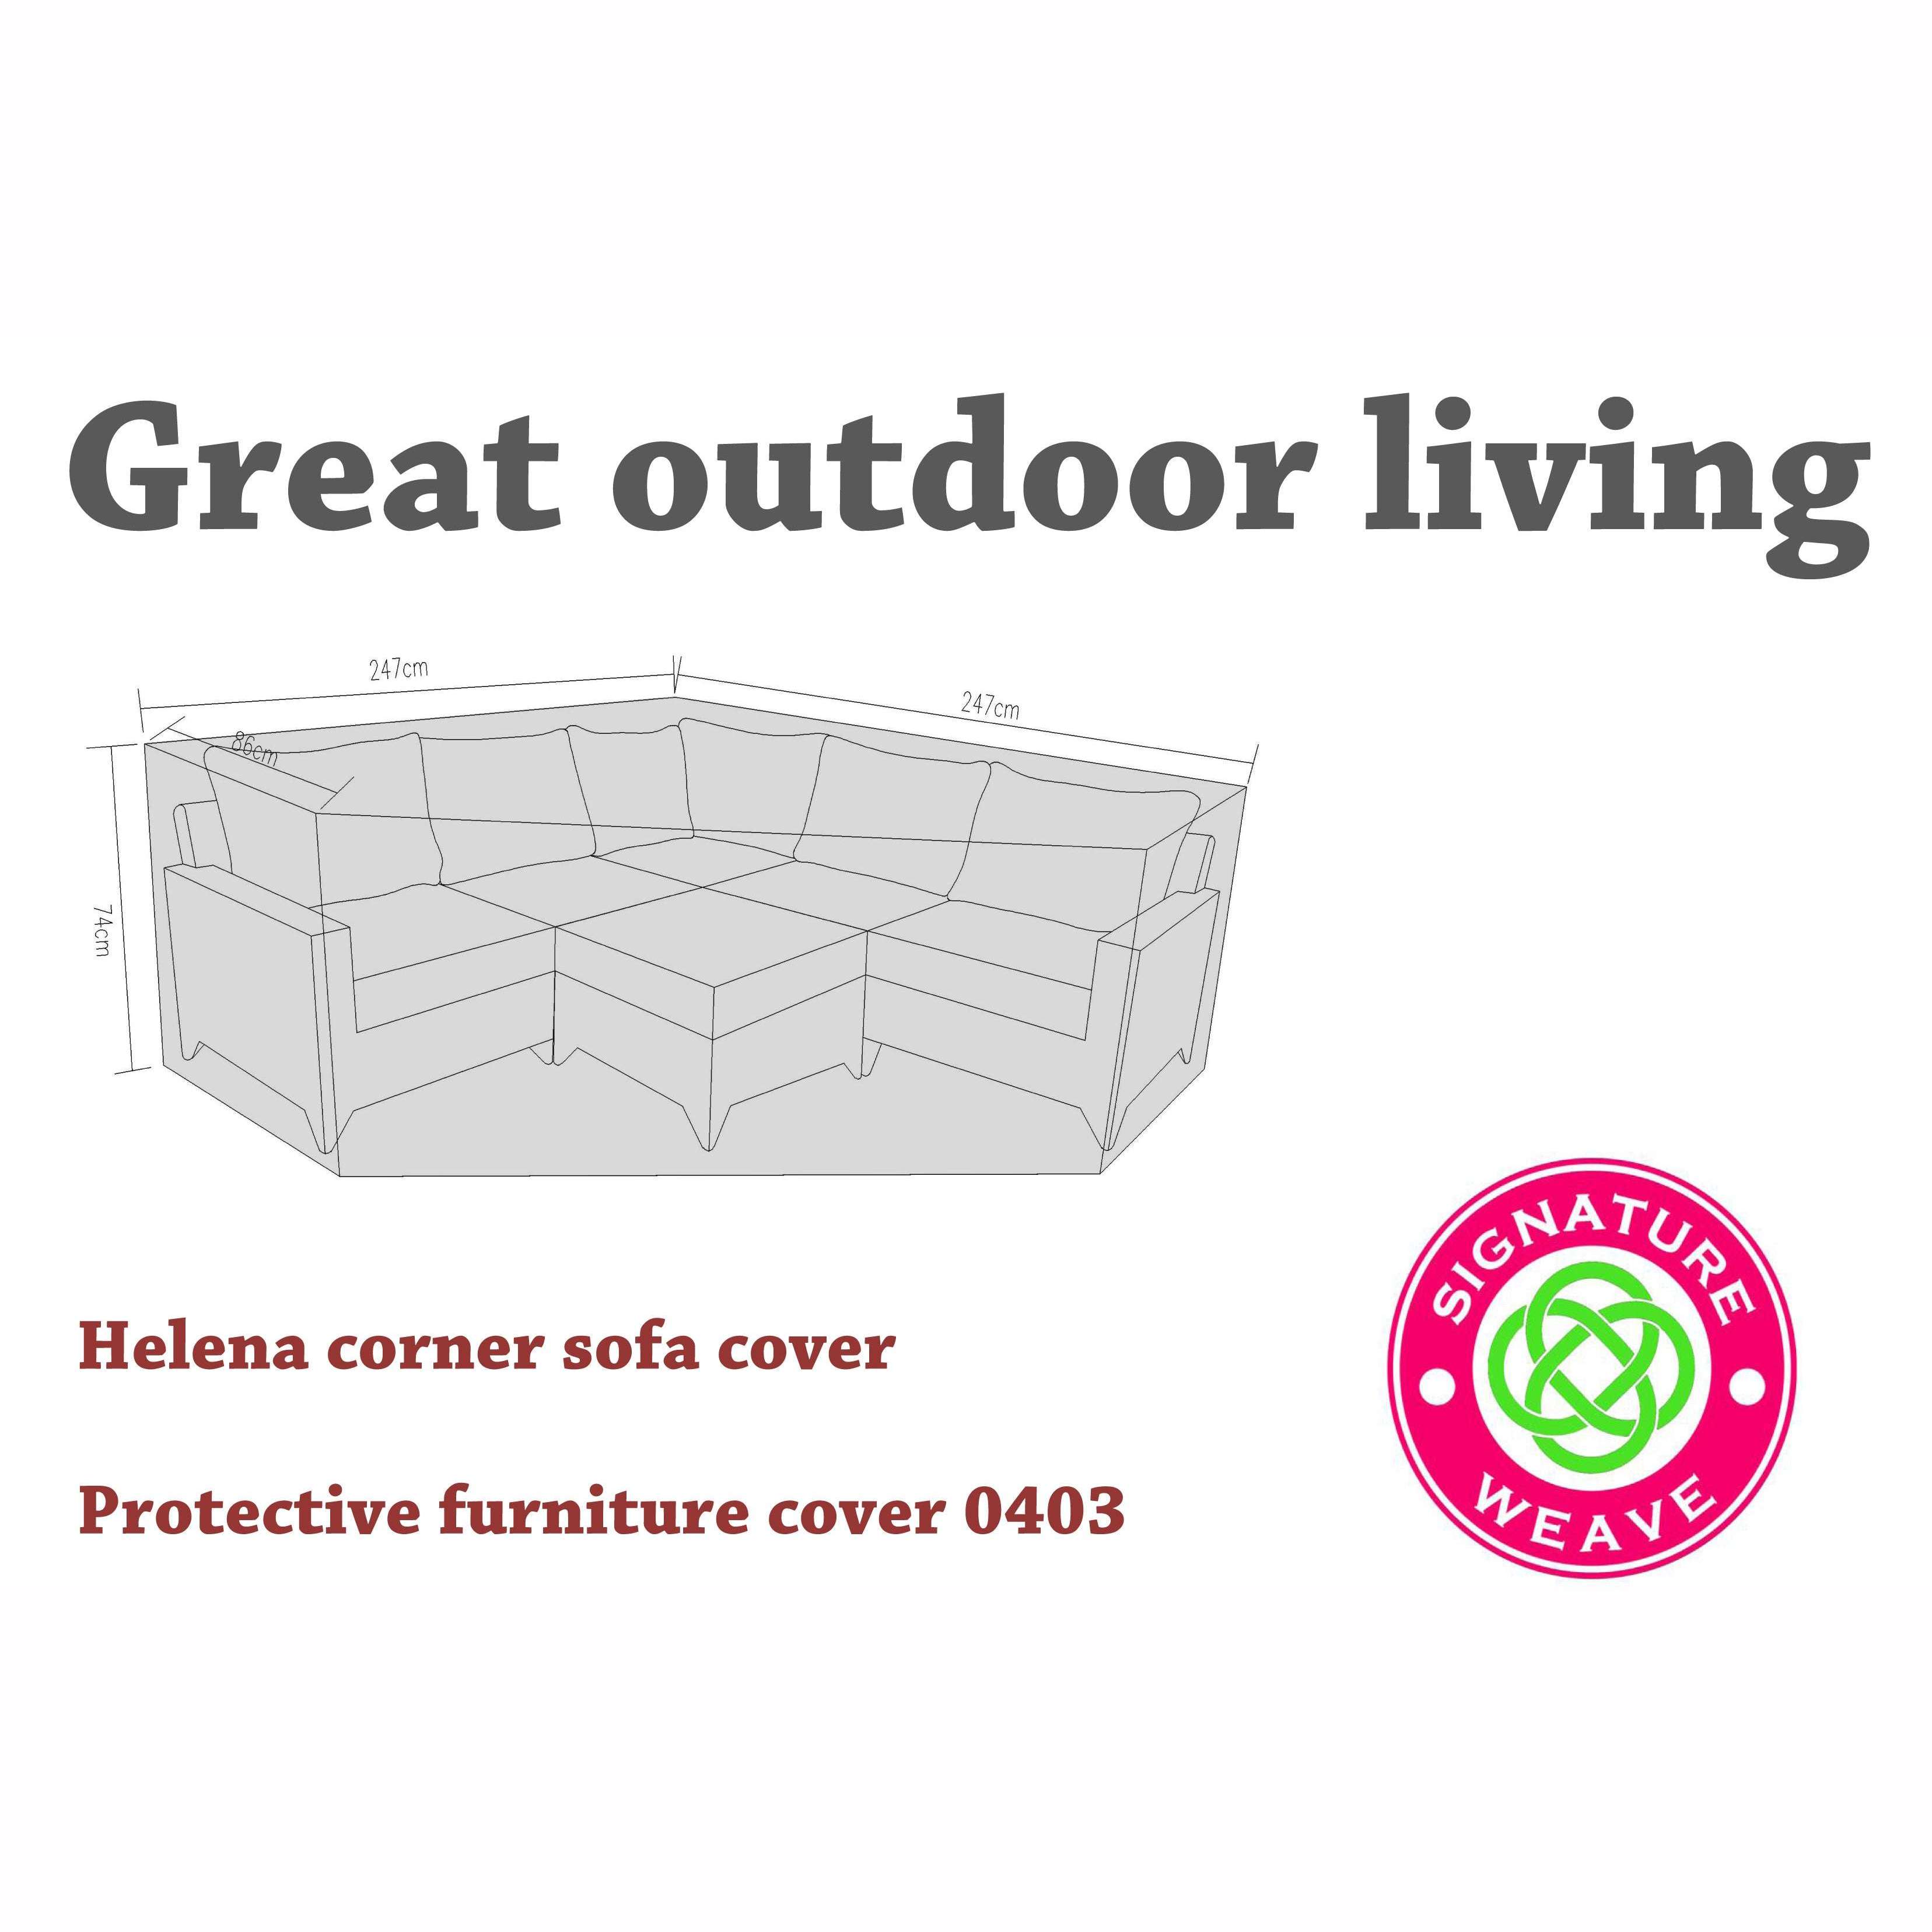 Exceptional Garden:Signature Weave Helena Furniture Cover